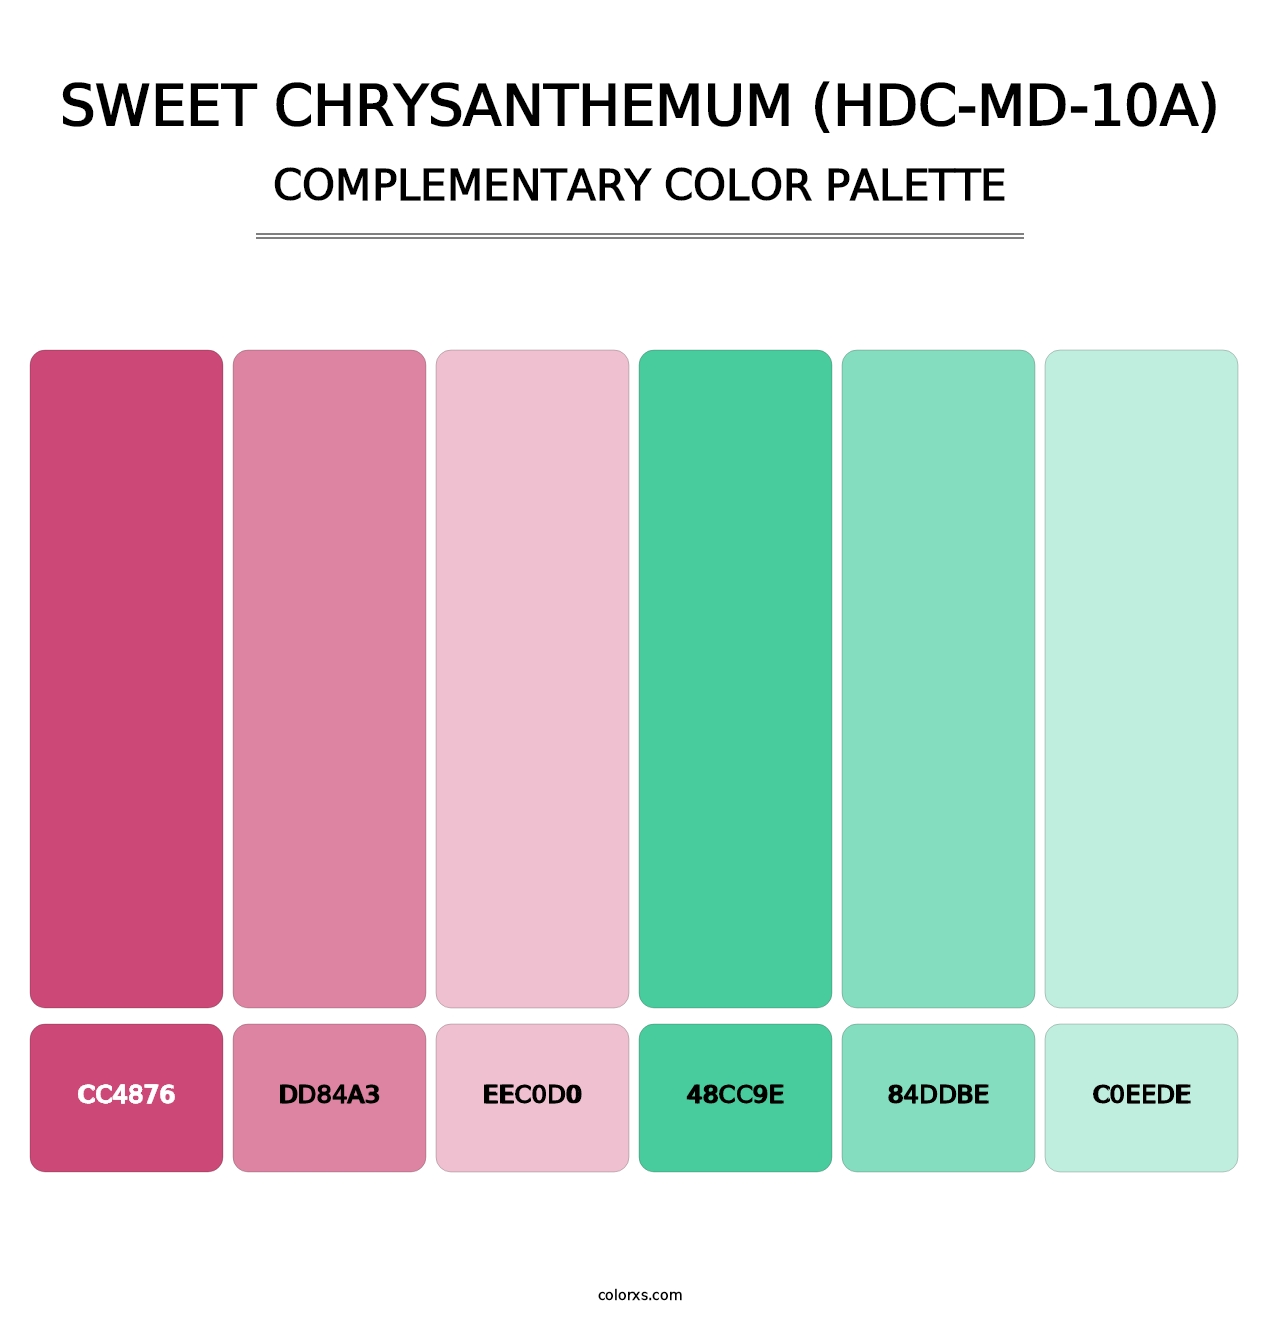 Sweet Chrysanthemum (HDC-MD-10A) - Complementary Color Palette